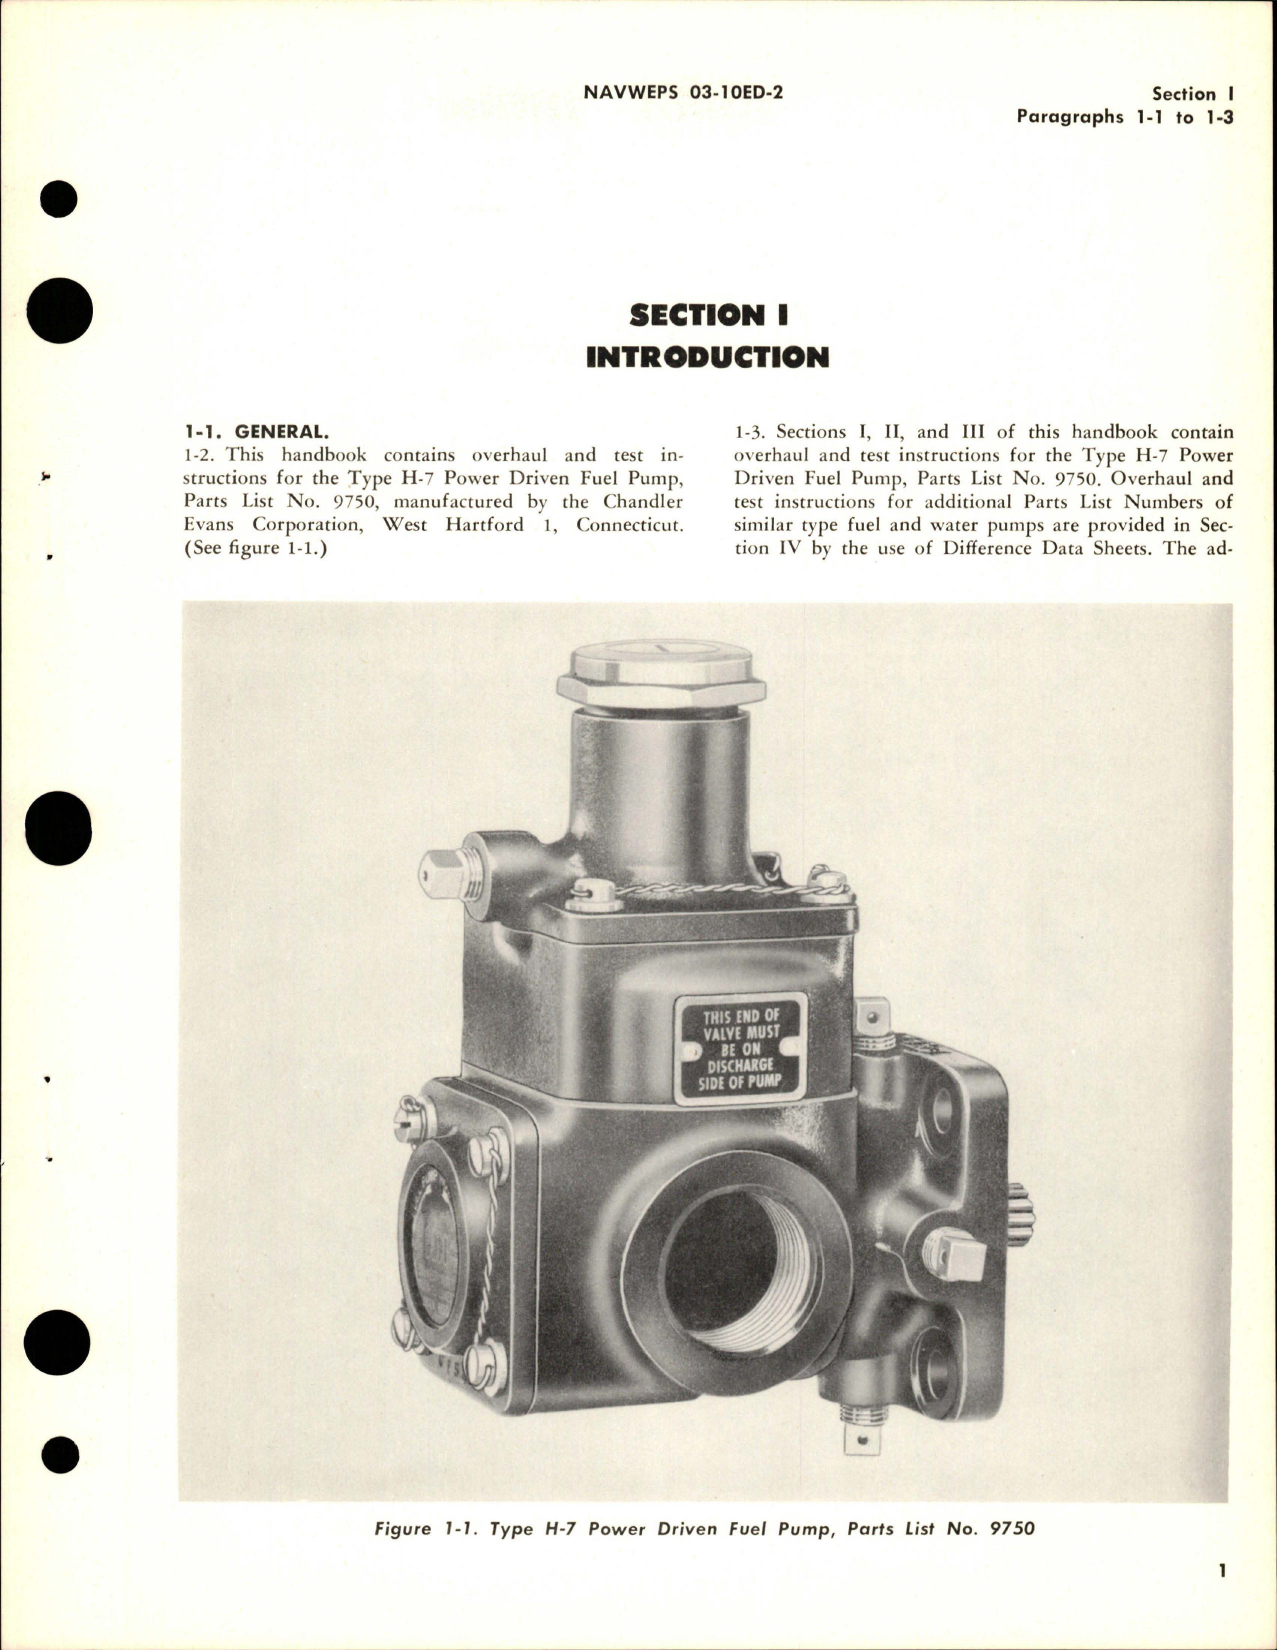 Sample page 5 from AirCorps Library document: Overhaul Instructions for Fuel and Water Pumps - Types F-10, H-2, H-4 and H-7